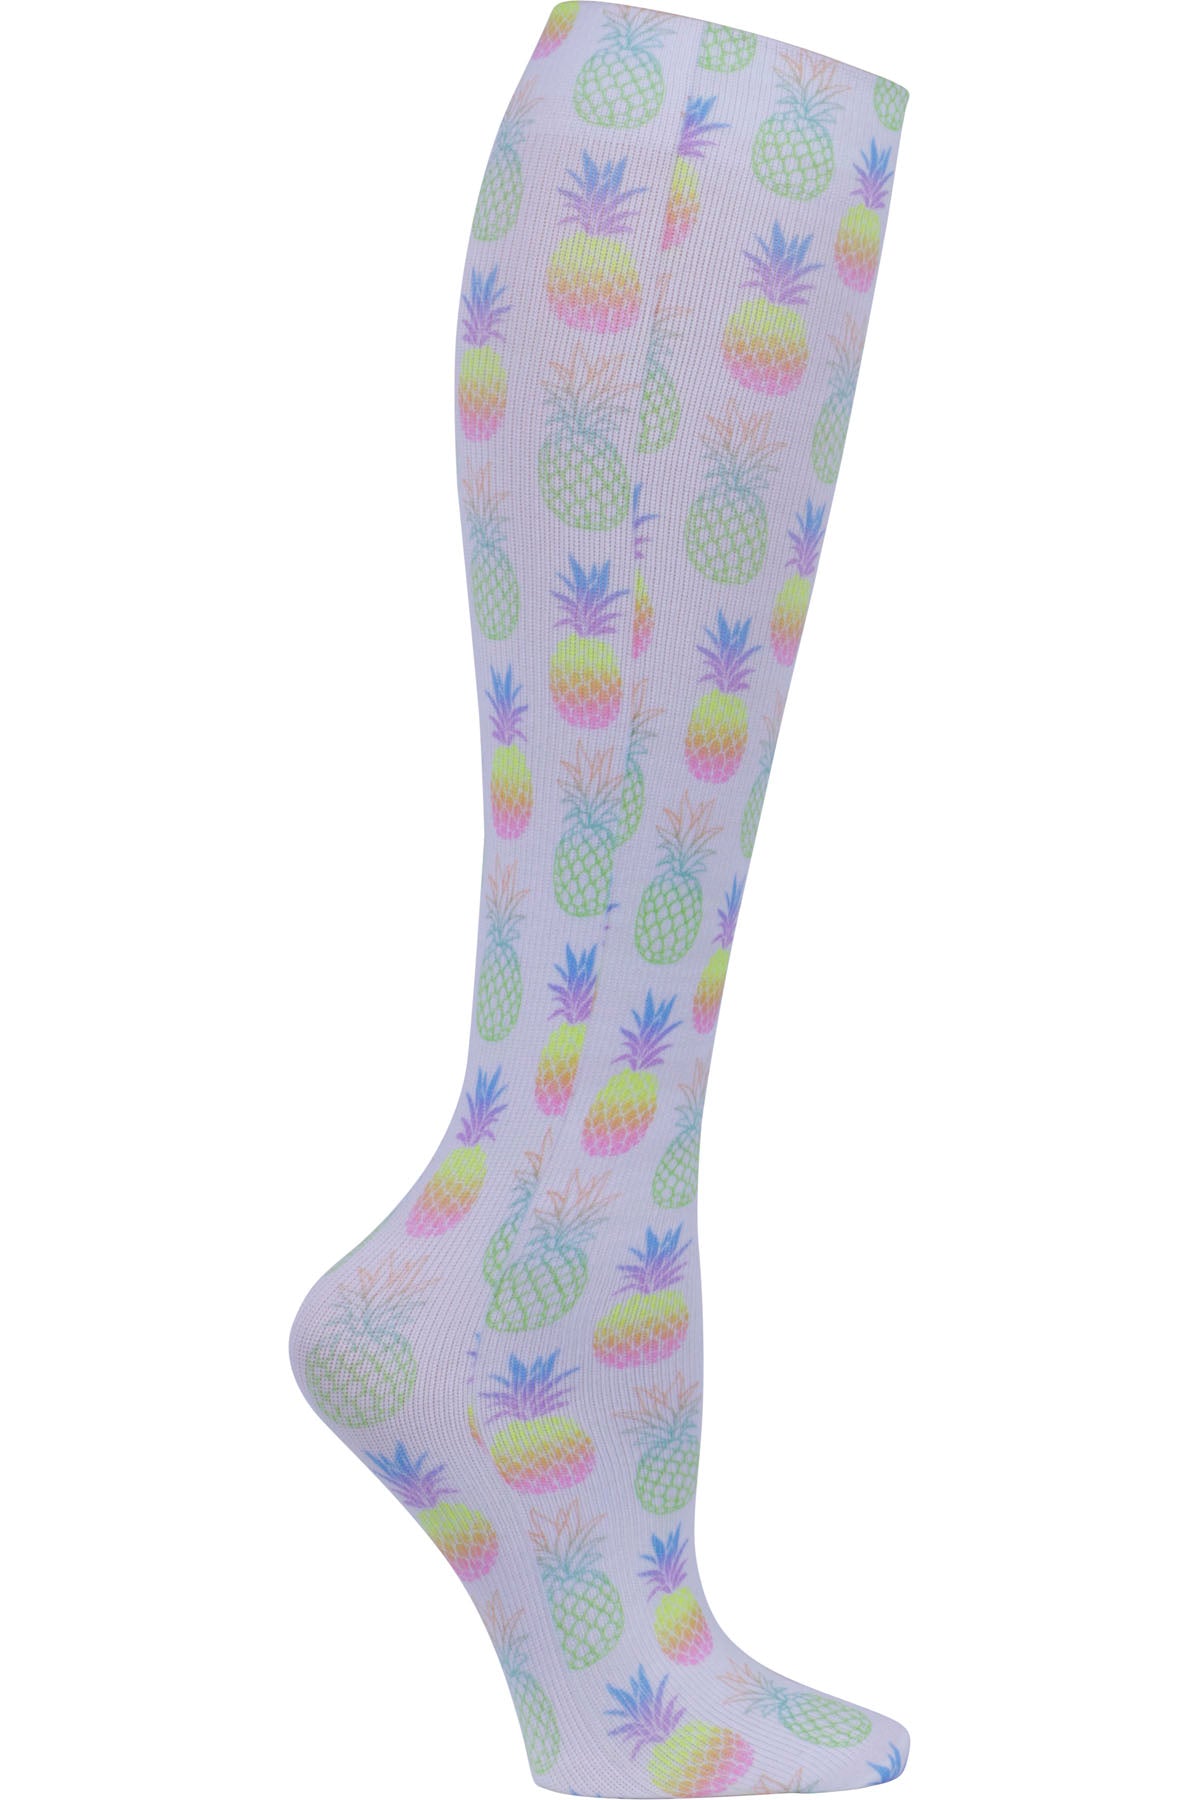 Celeste Stein Mild Compression Socks 8-15 mmHG Popping Pineapples at Parker's Clothing and Shoes.